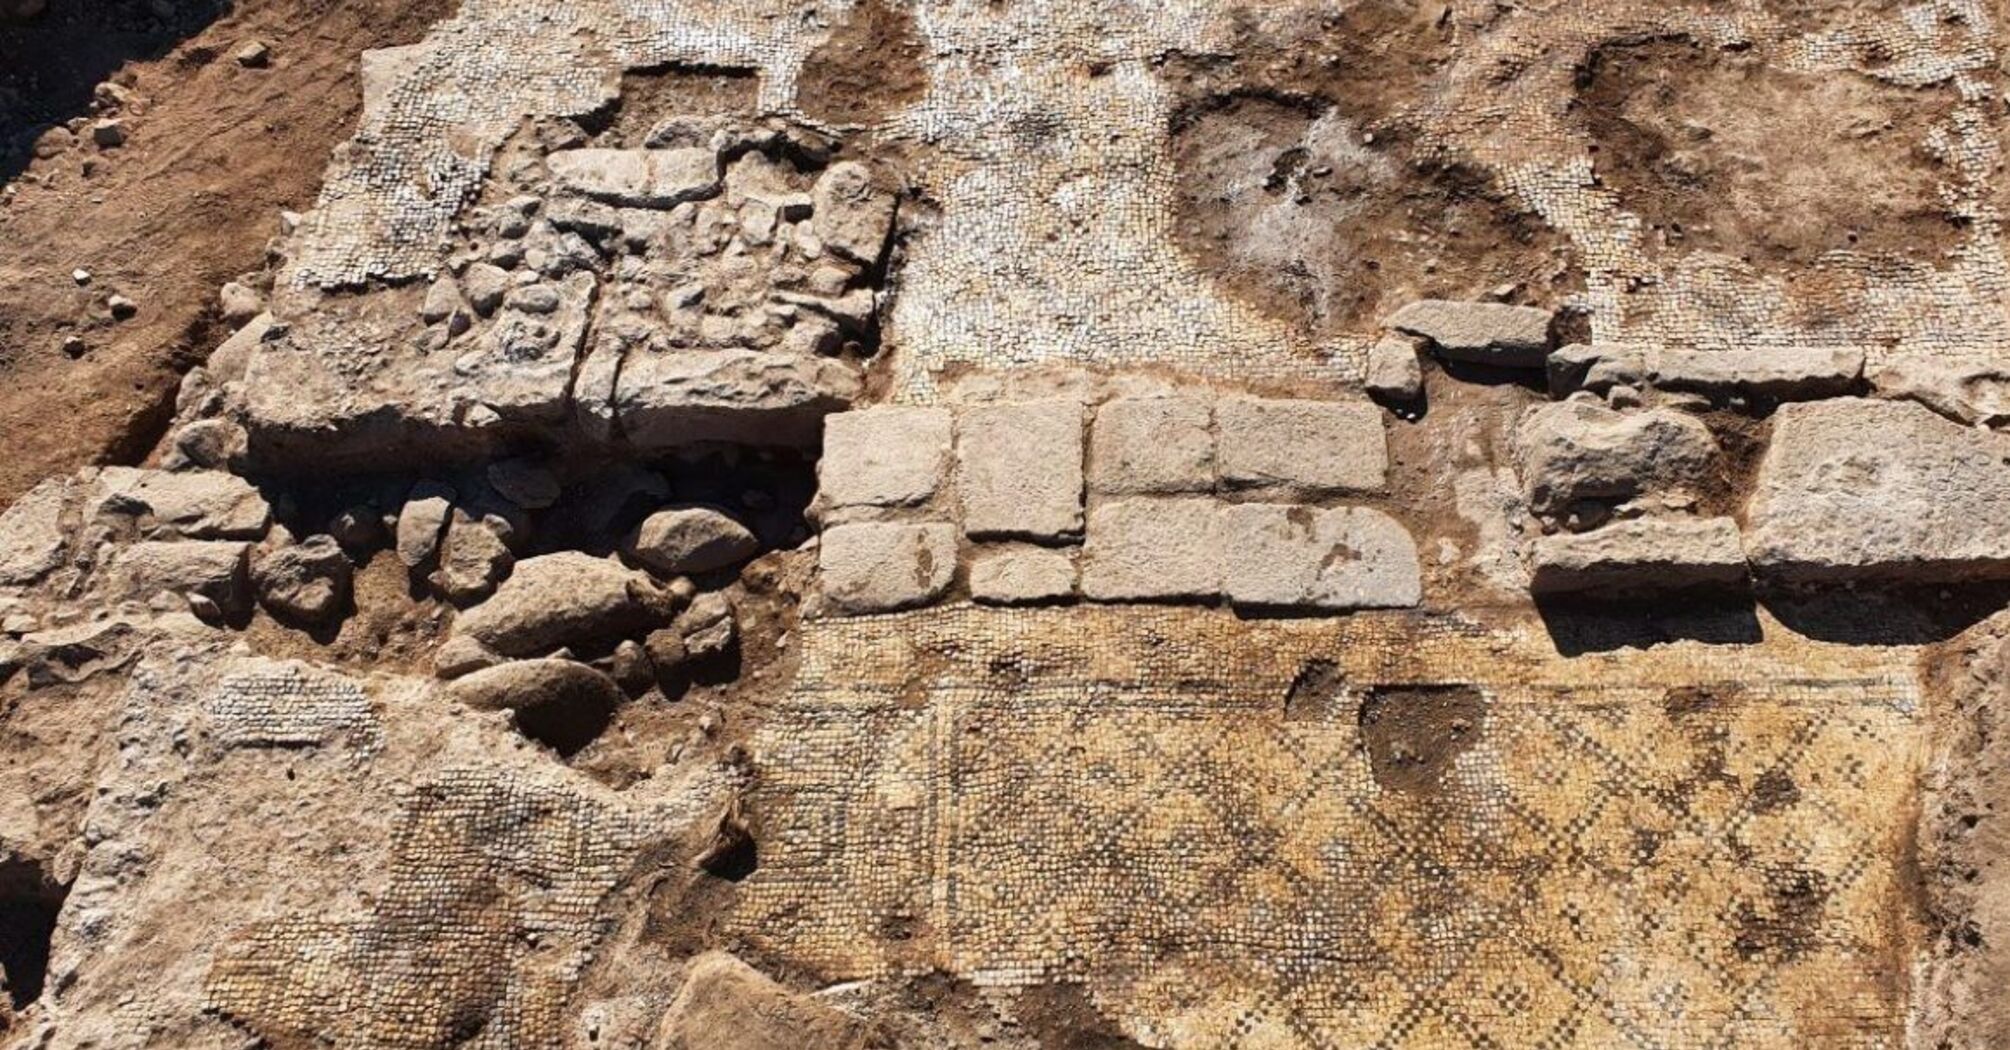 Inscription found in Israel, 1500 years old: Jesus Christ was mentioned (photo)